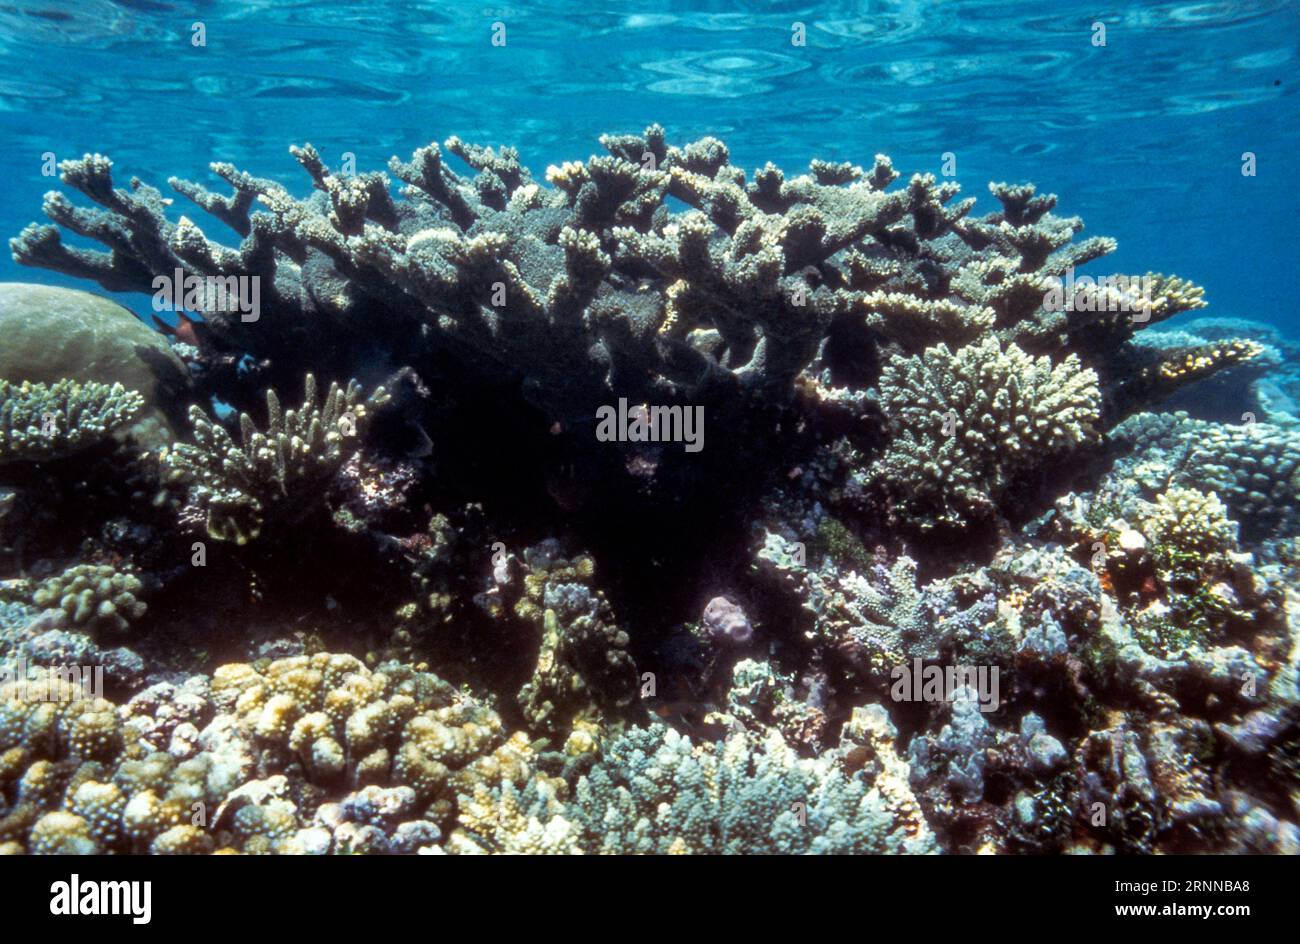 A large colony of stony coral (Acropora florida) in shallow water at Kurumba Island, the Maldives. Stock Photo